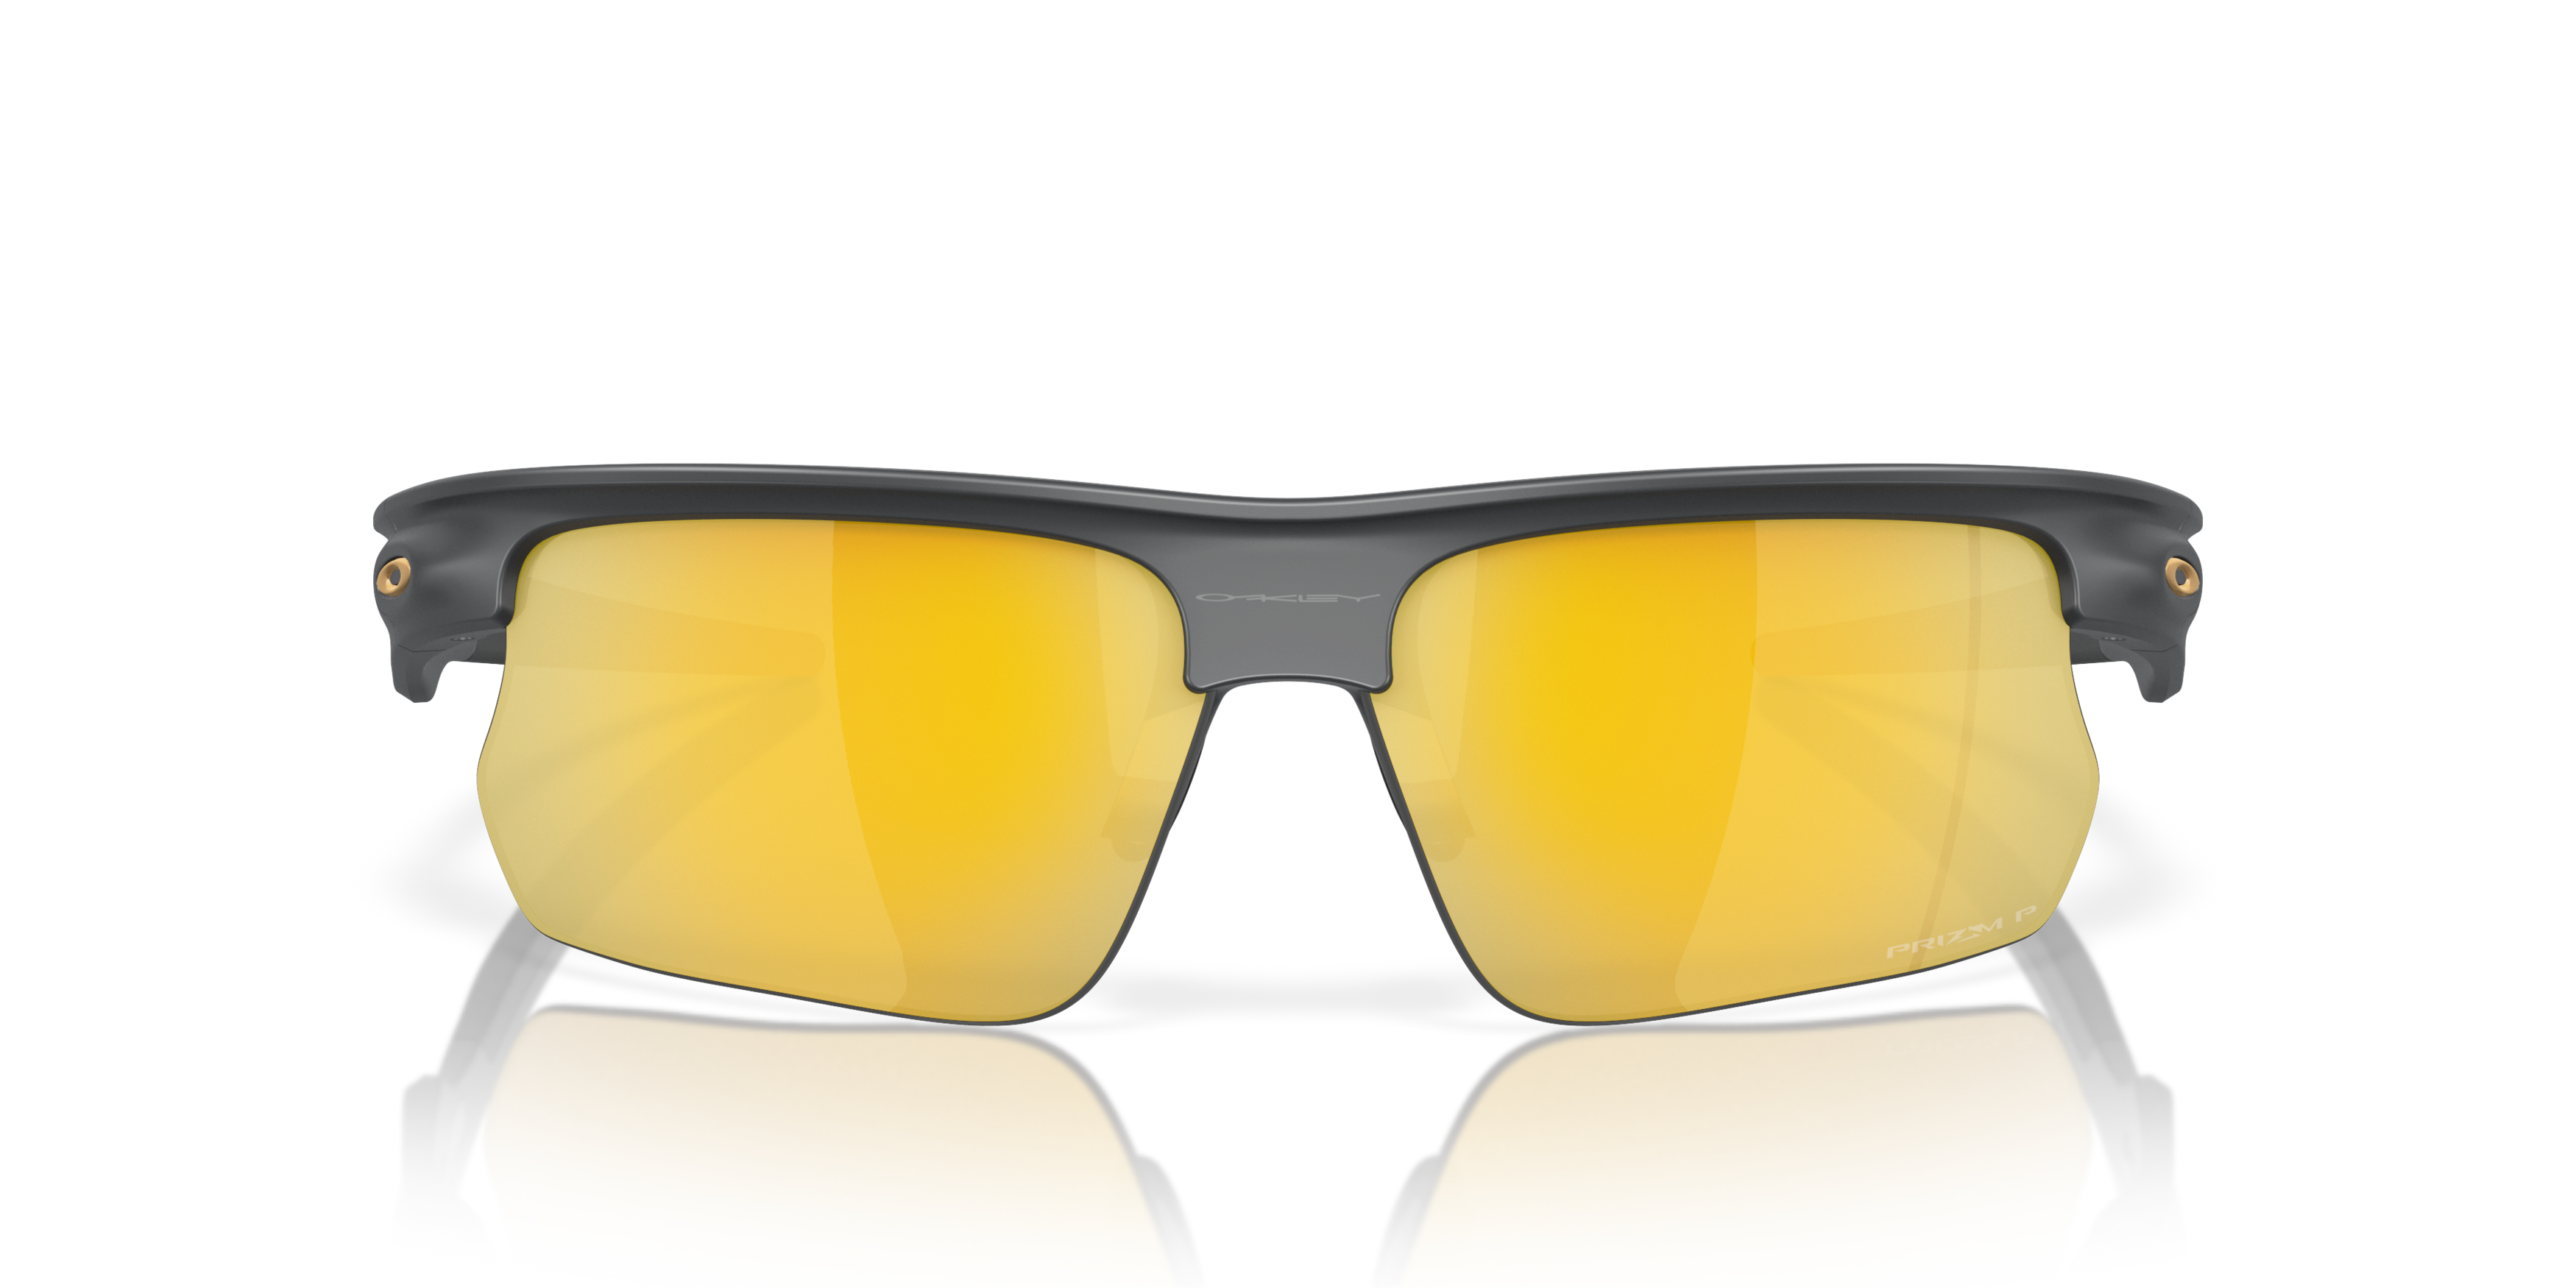 [products.image.front] Oakley OO9400 940012